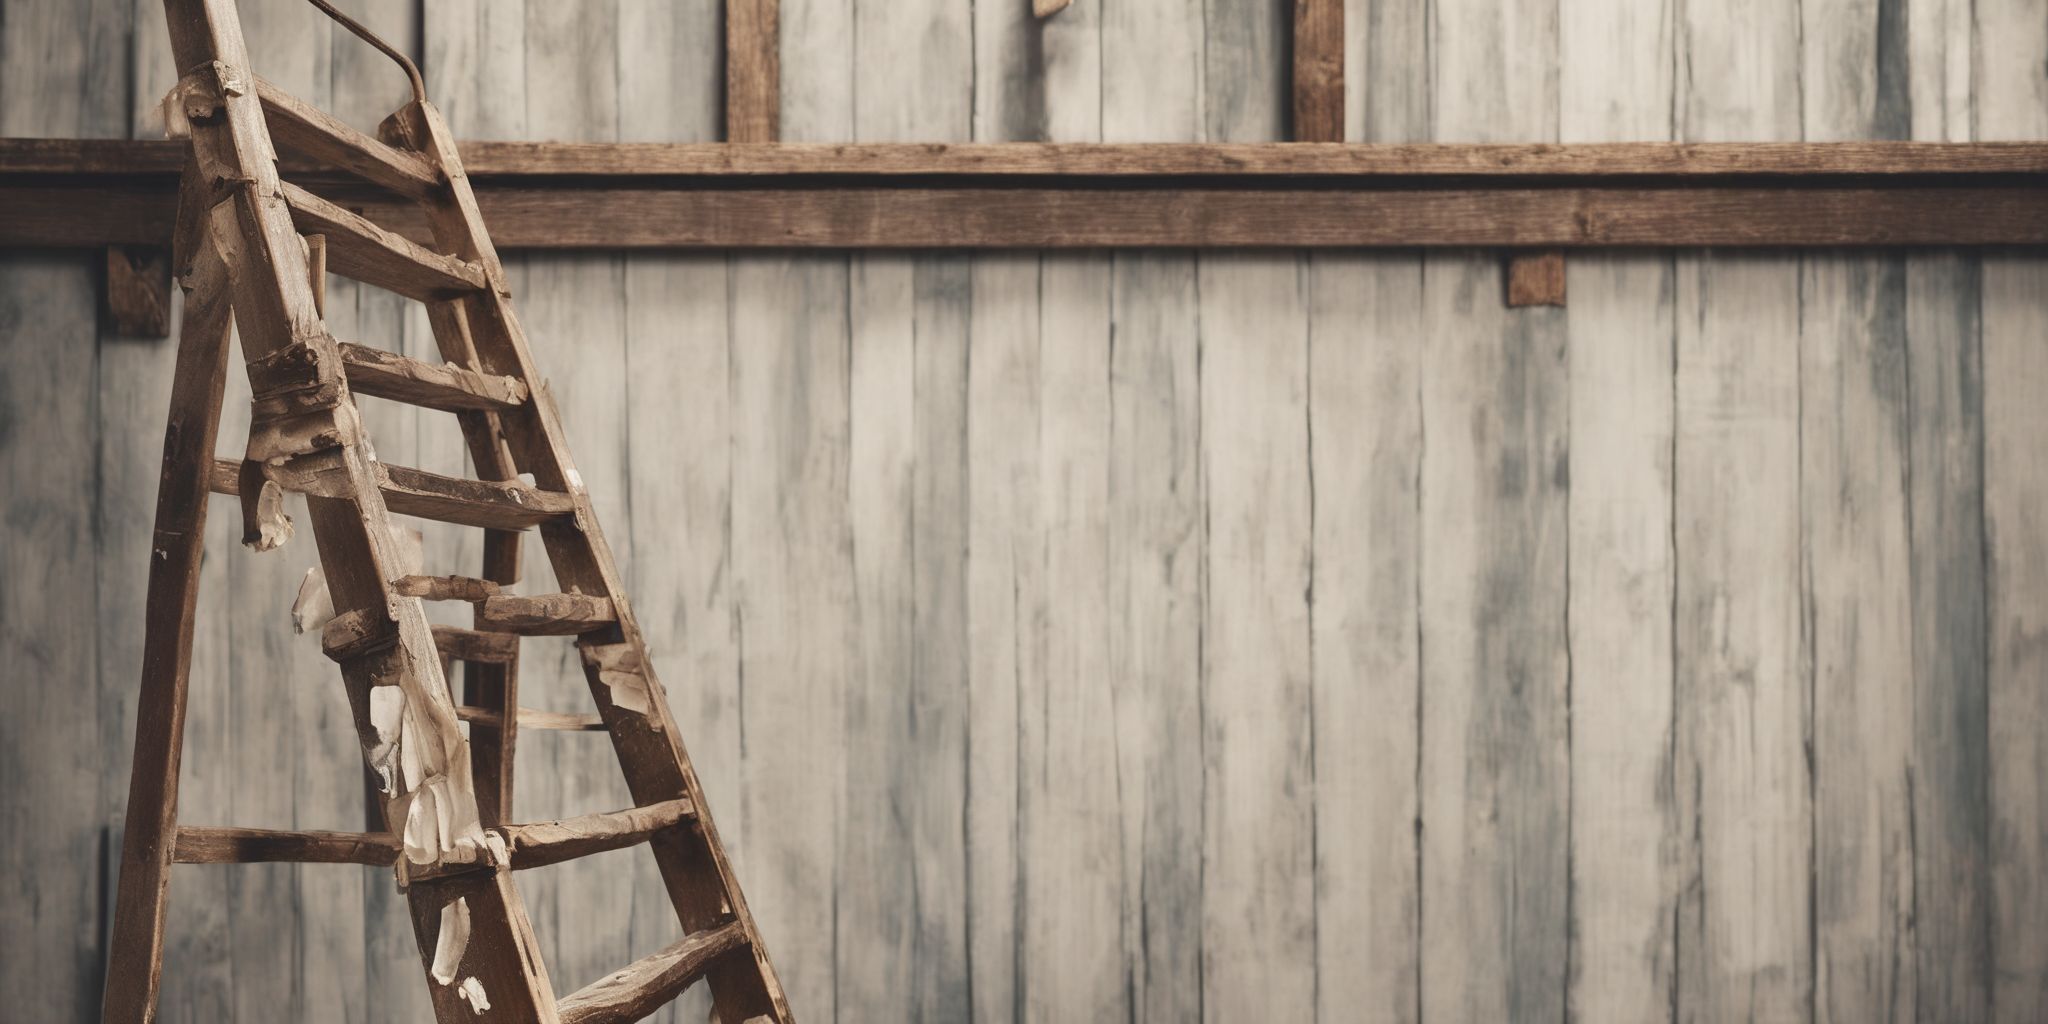 Credit Unions Student Loans: Ladder  in realistic, photographic style